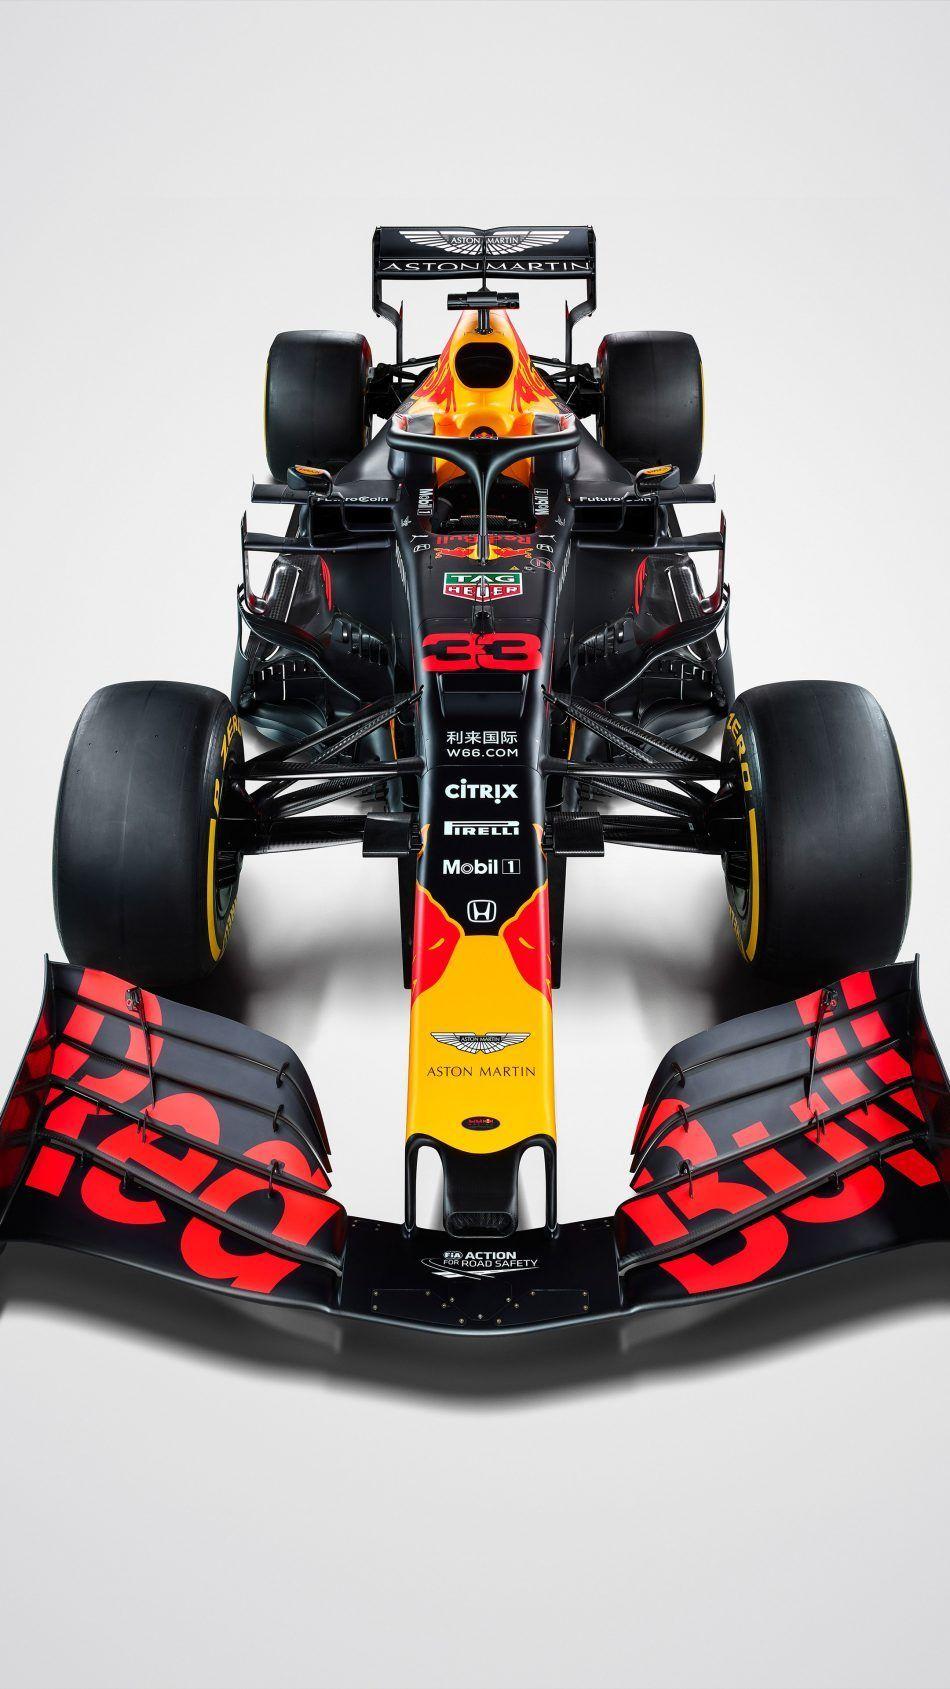 F1 Red Bull Wallpapers Top Free F1 Red Bull Backgrounds Wallpaperaccess